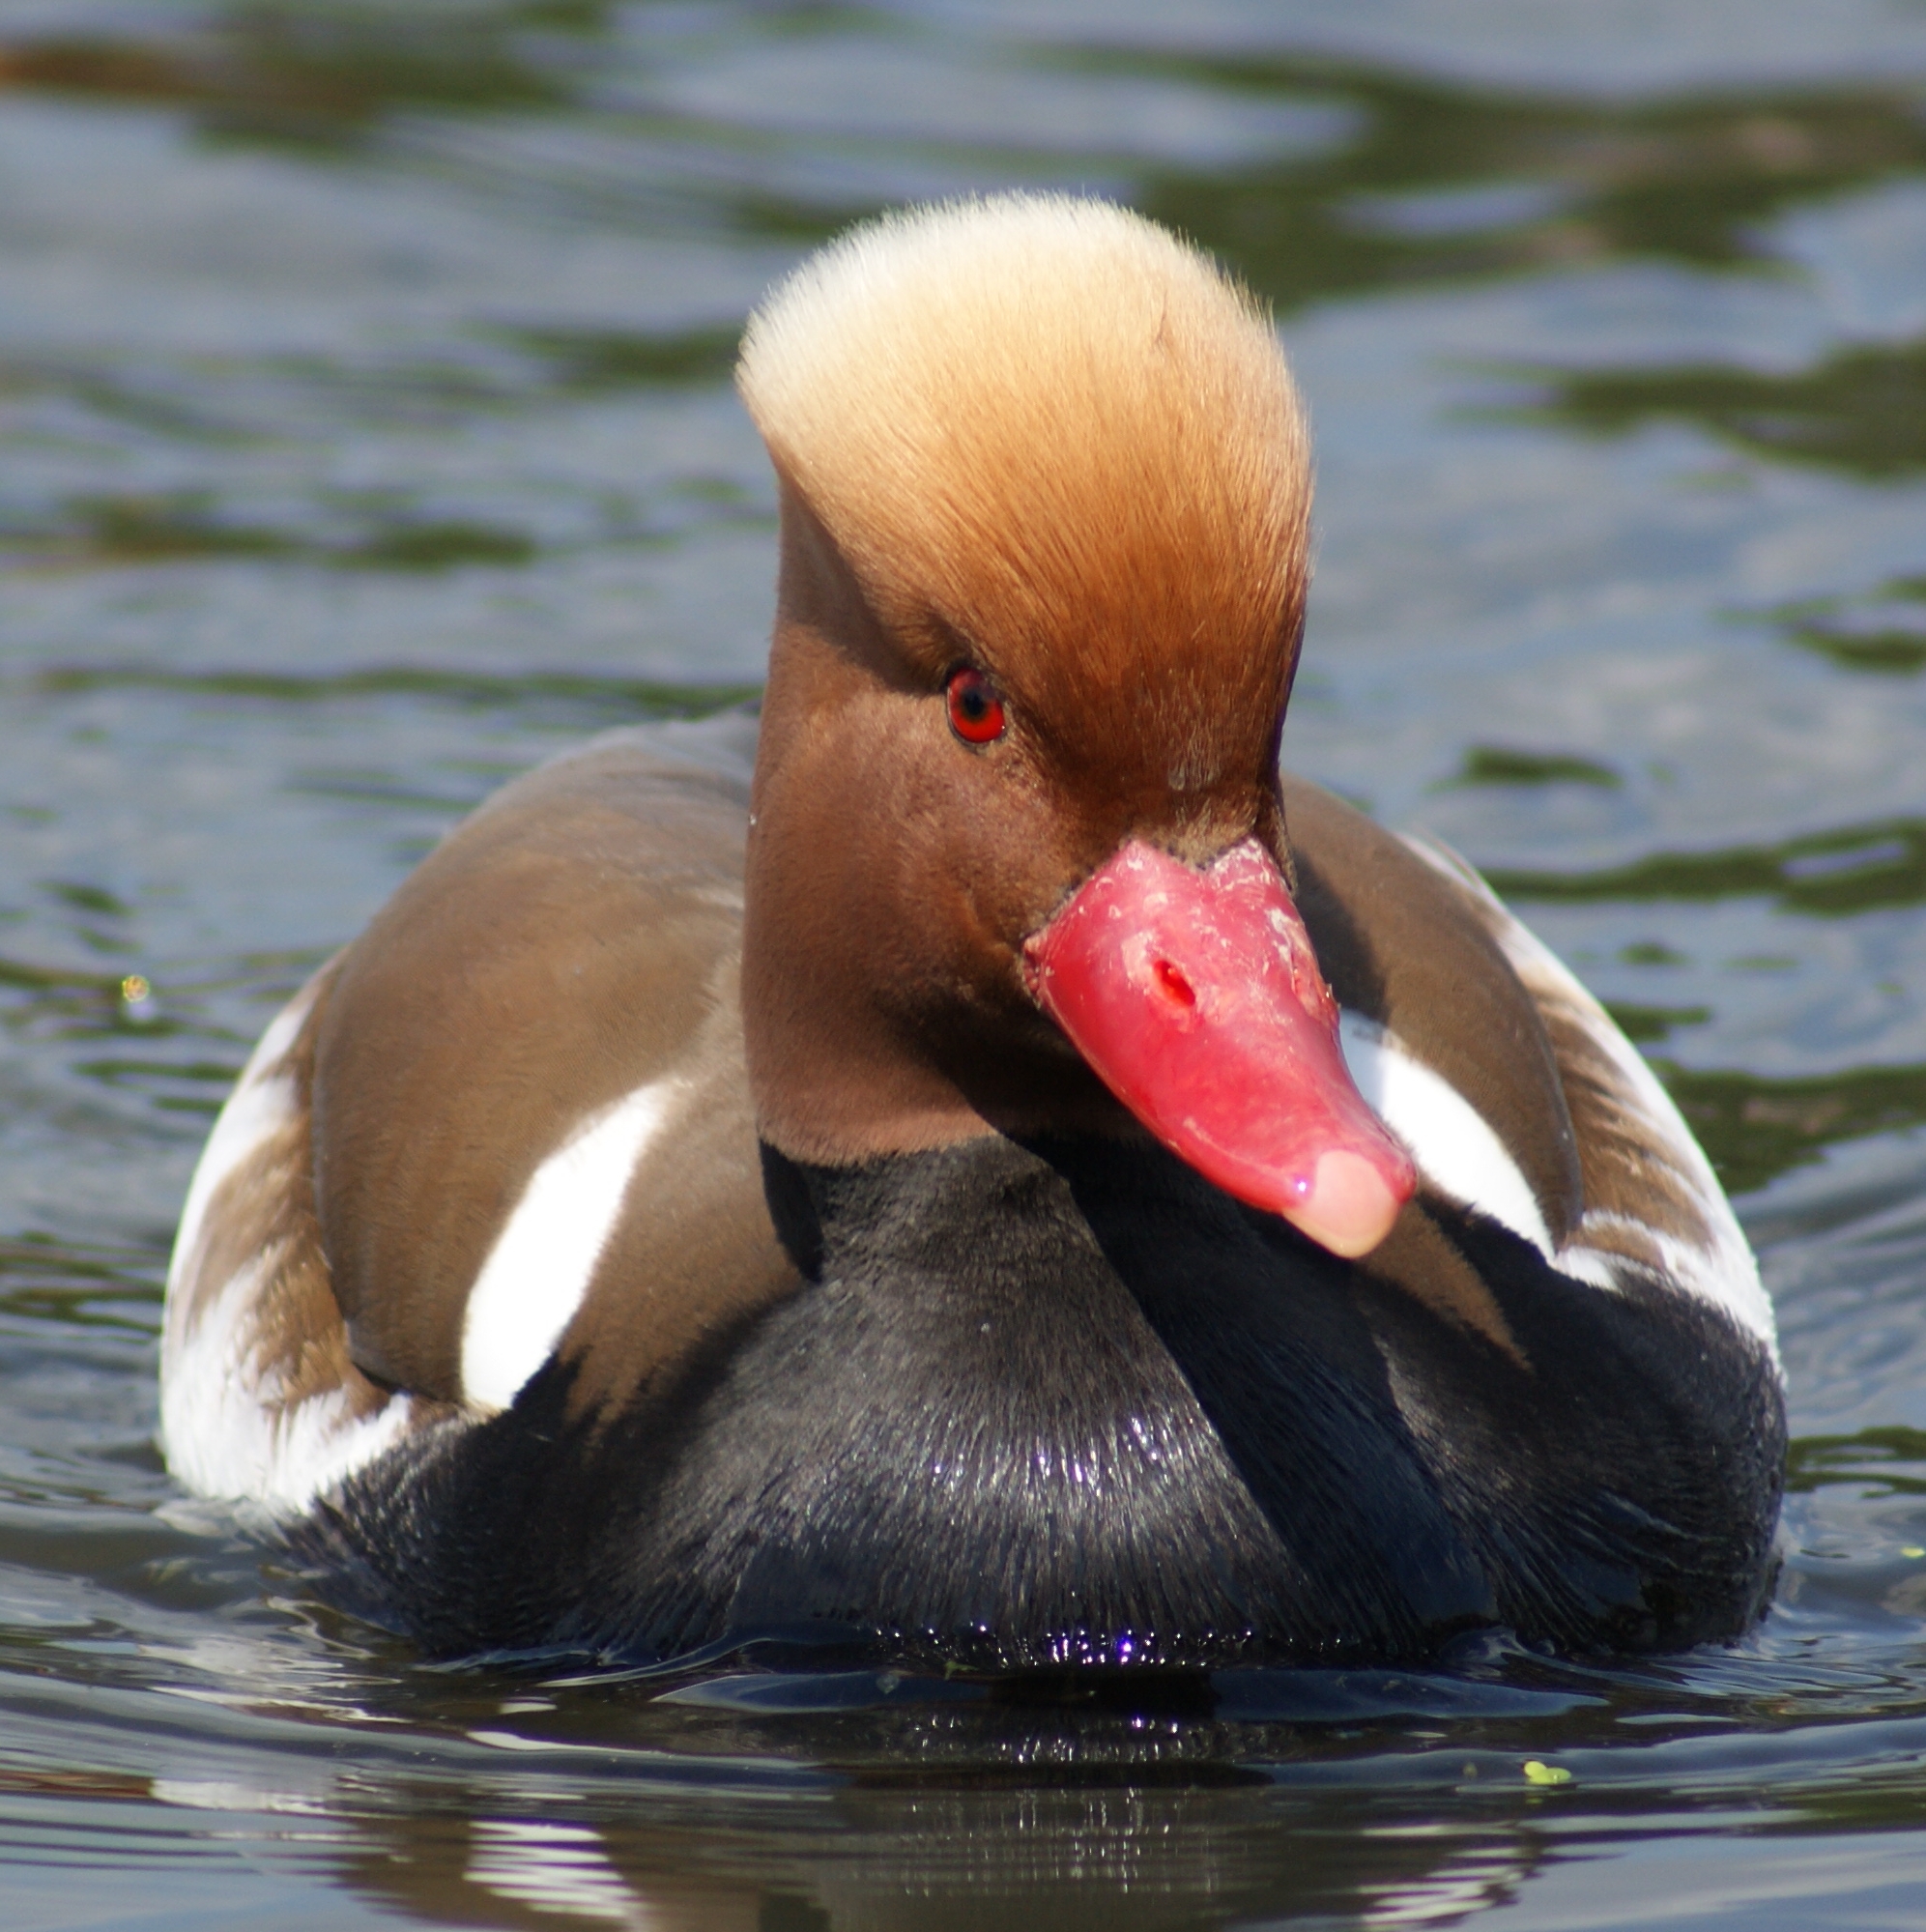 File:Red Crested Pochard 039.jpg - Wikimedia Commons